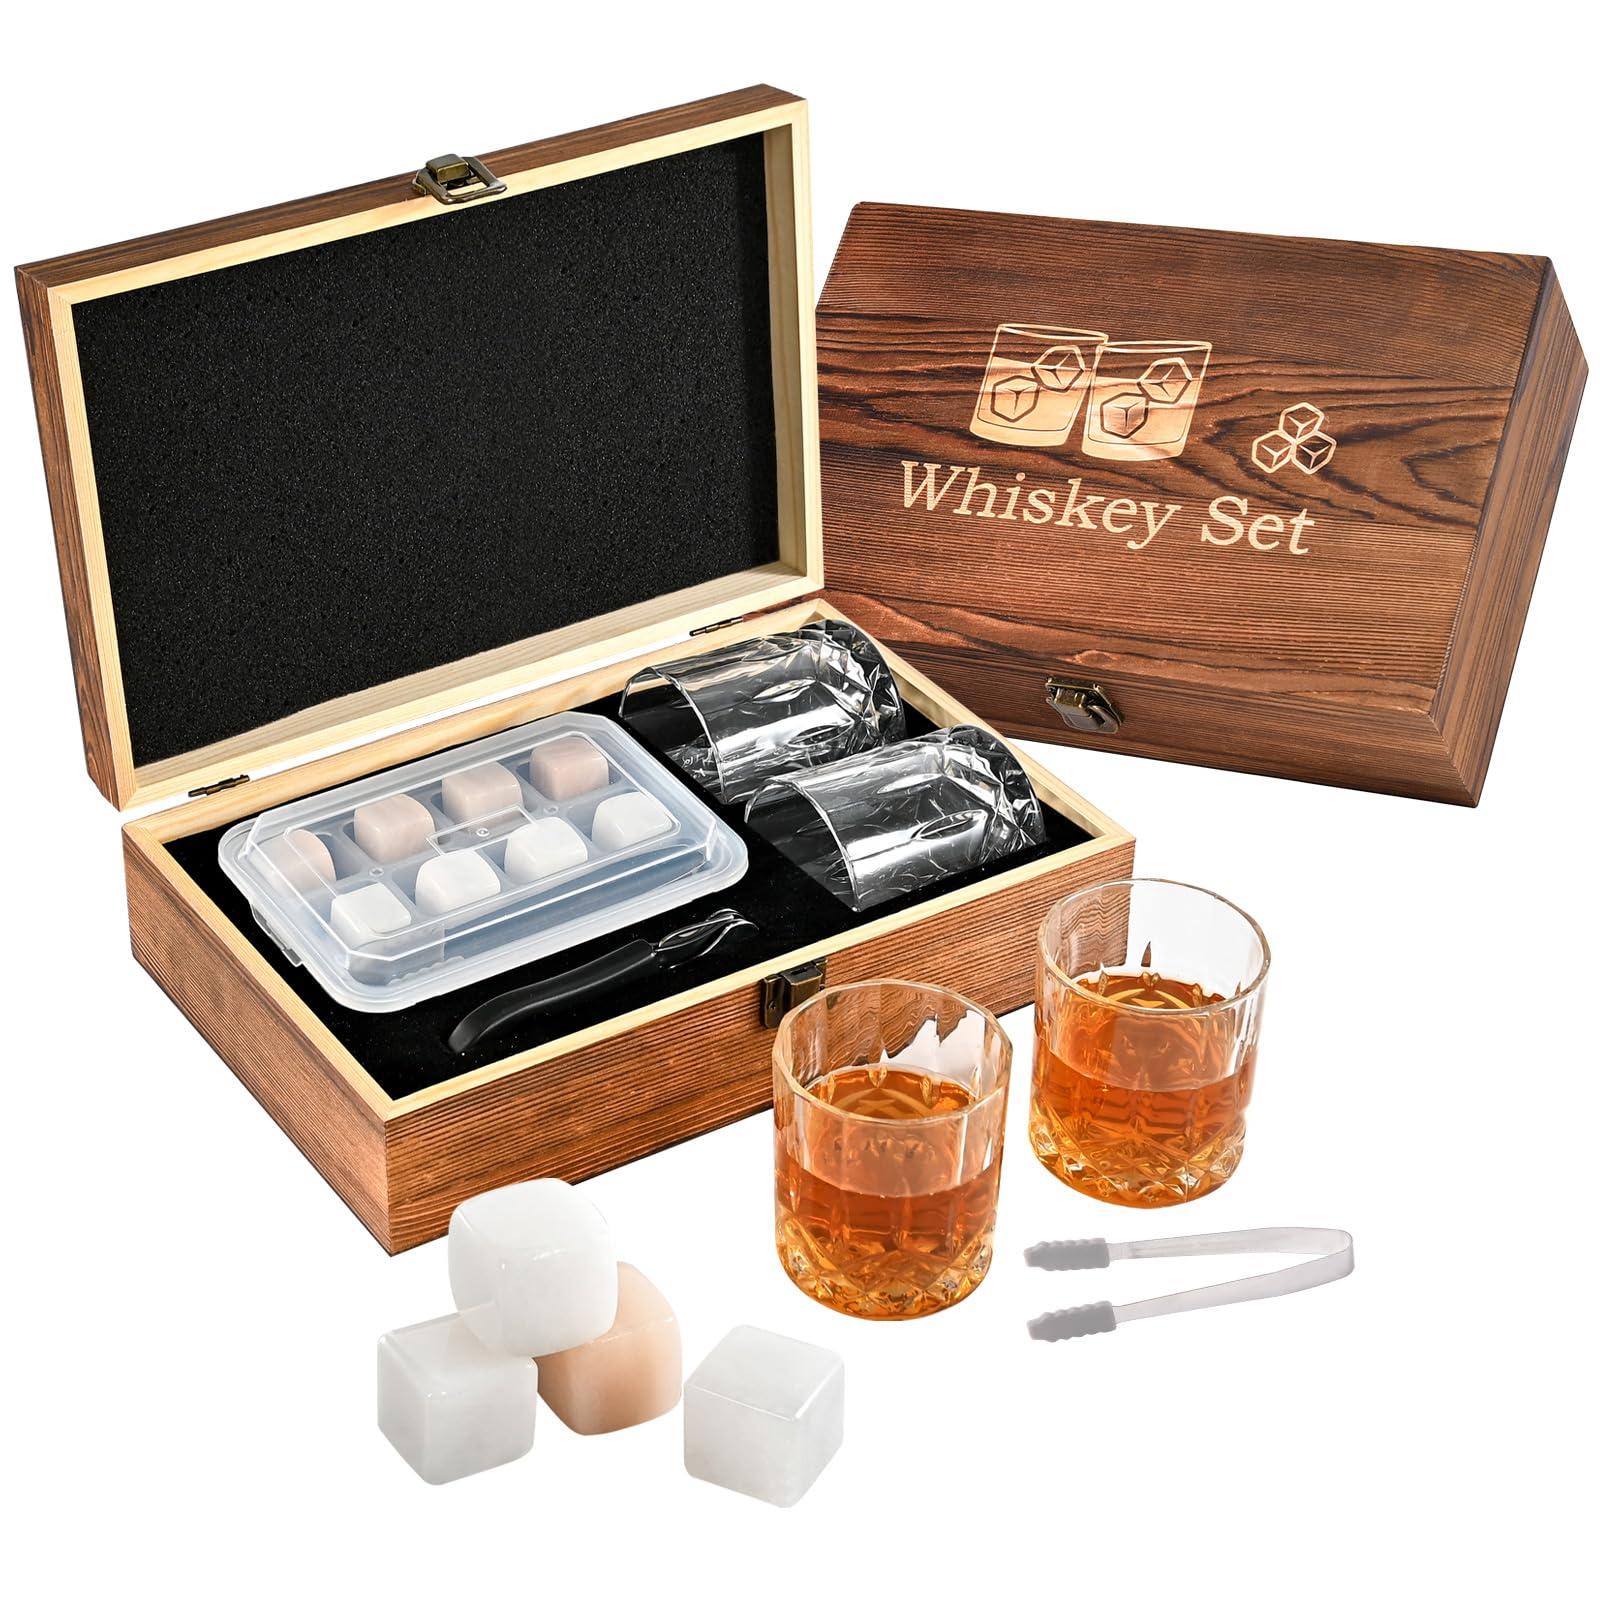 EooCoo 8pcs Marble Whisky Stones Gift Set for Men, Premium Wooden Box with Glasses,Two-Color Design Suitable for Couples/Friends, Easy Storage, for Anniversary Birthday Wedding Housewarming 0